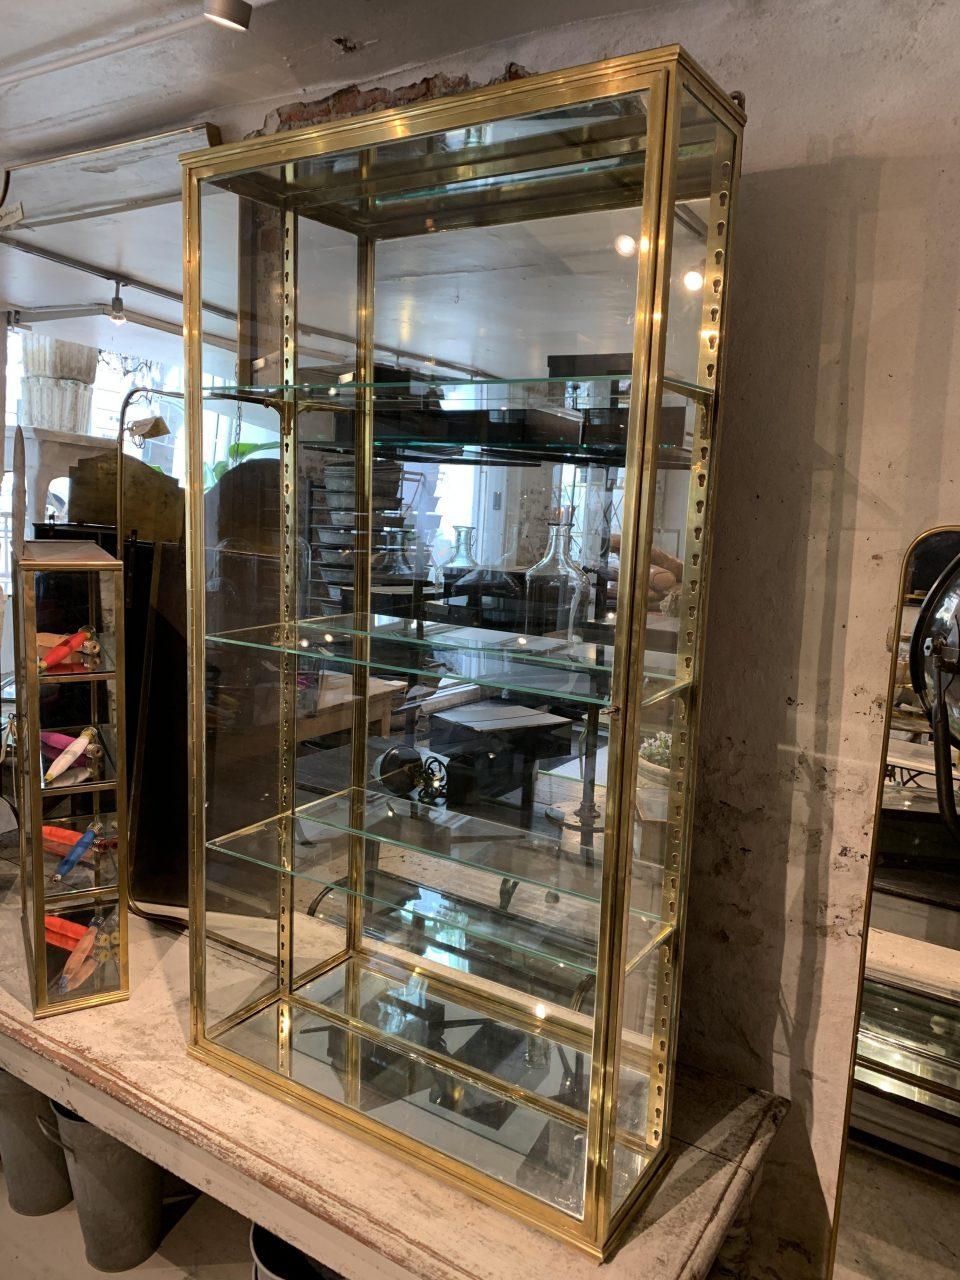 Large spacious and handsome old French brass display cabinet, from around the year 1900. Classic Art Nouveau style, which can be seen on the quality brass shelf brackets. This lovely wall vitrine is equipped with an impressive large glass door with